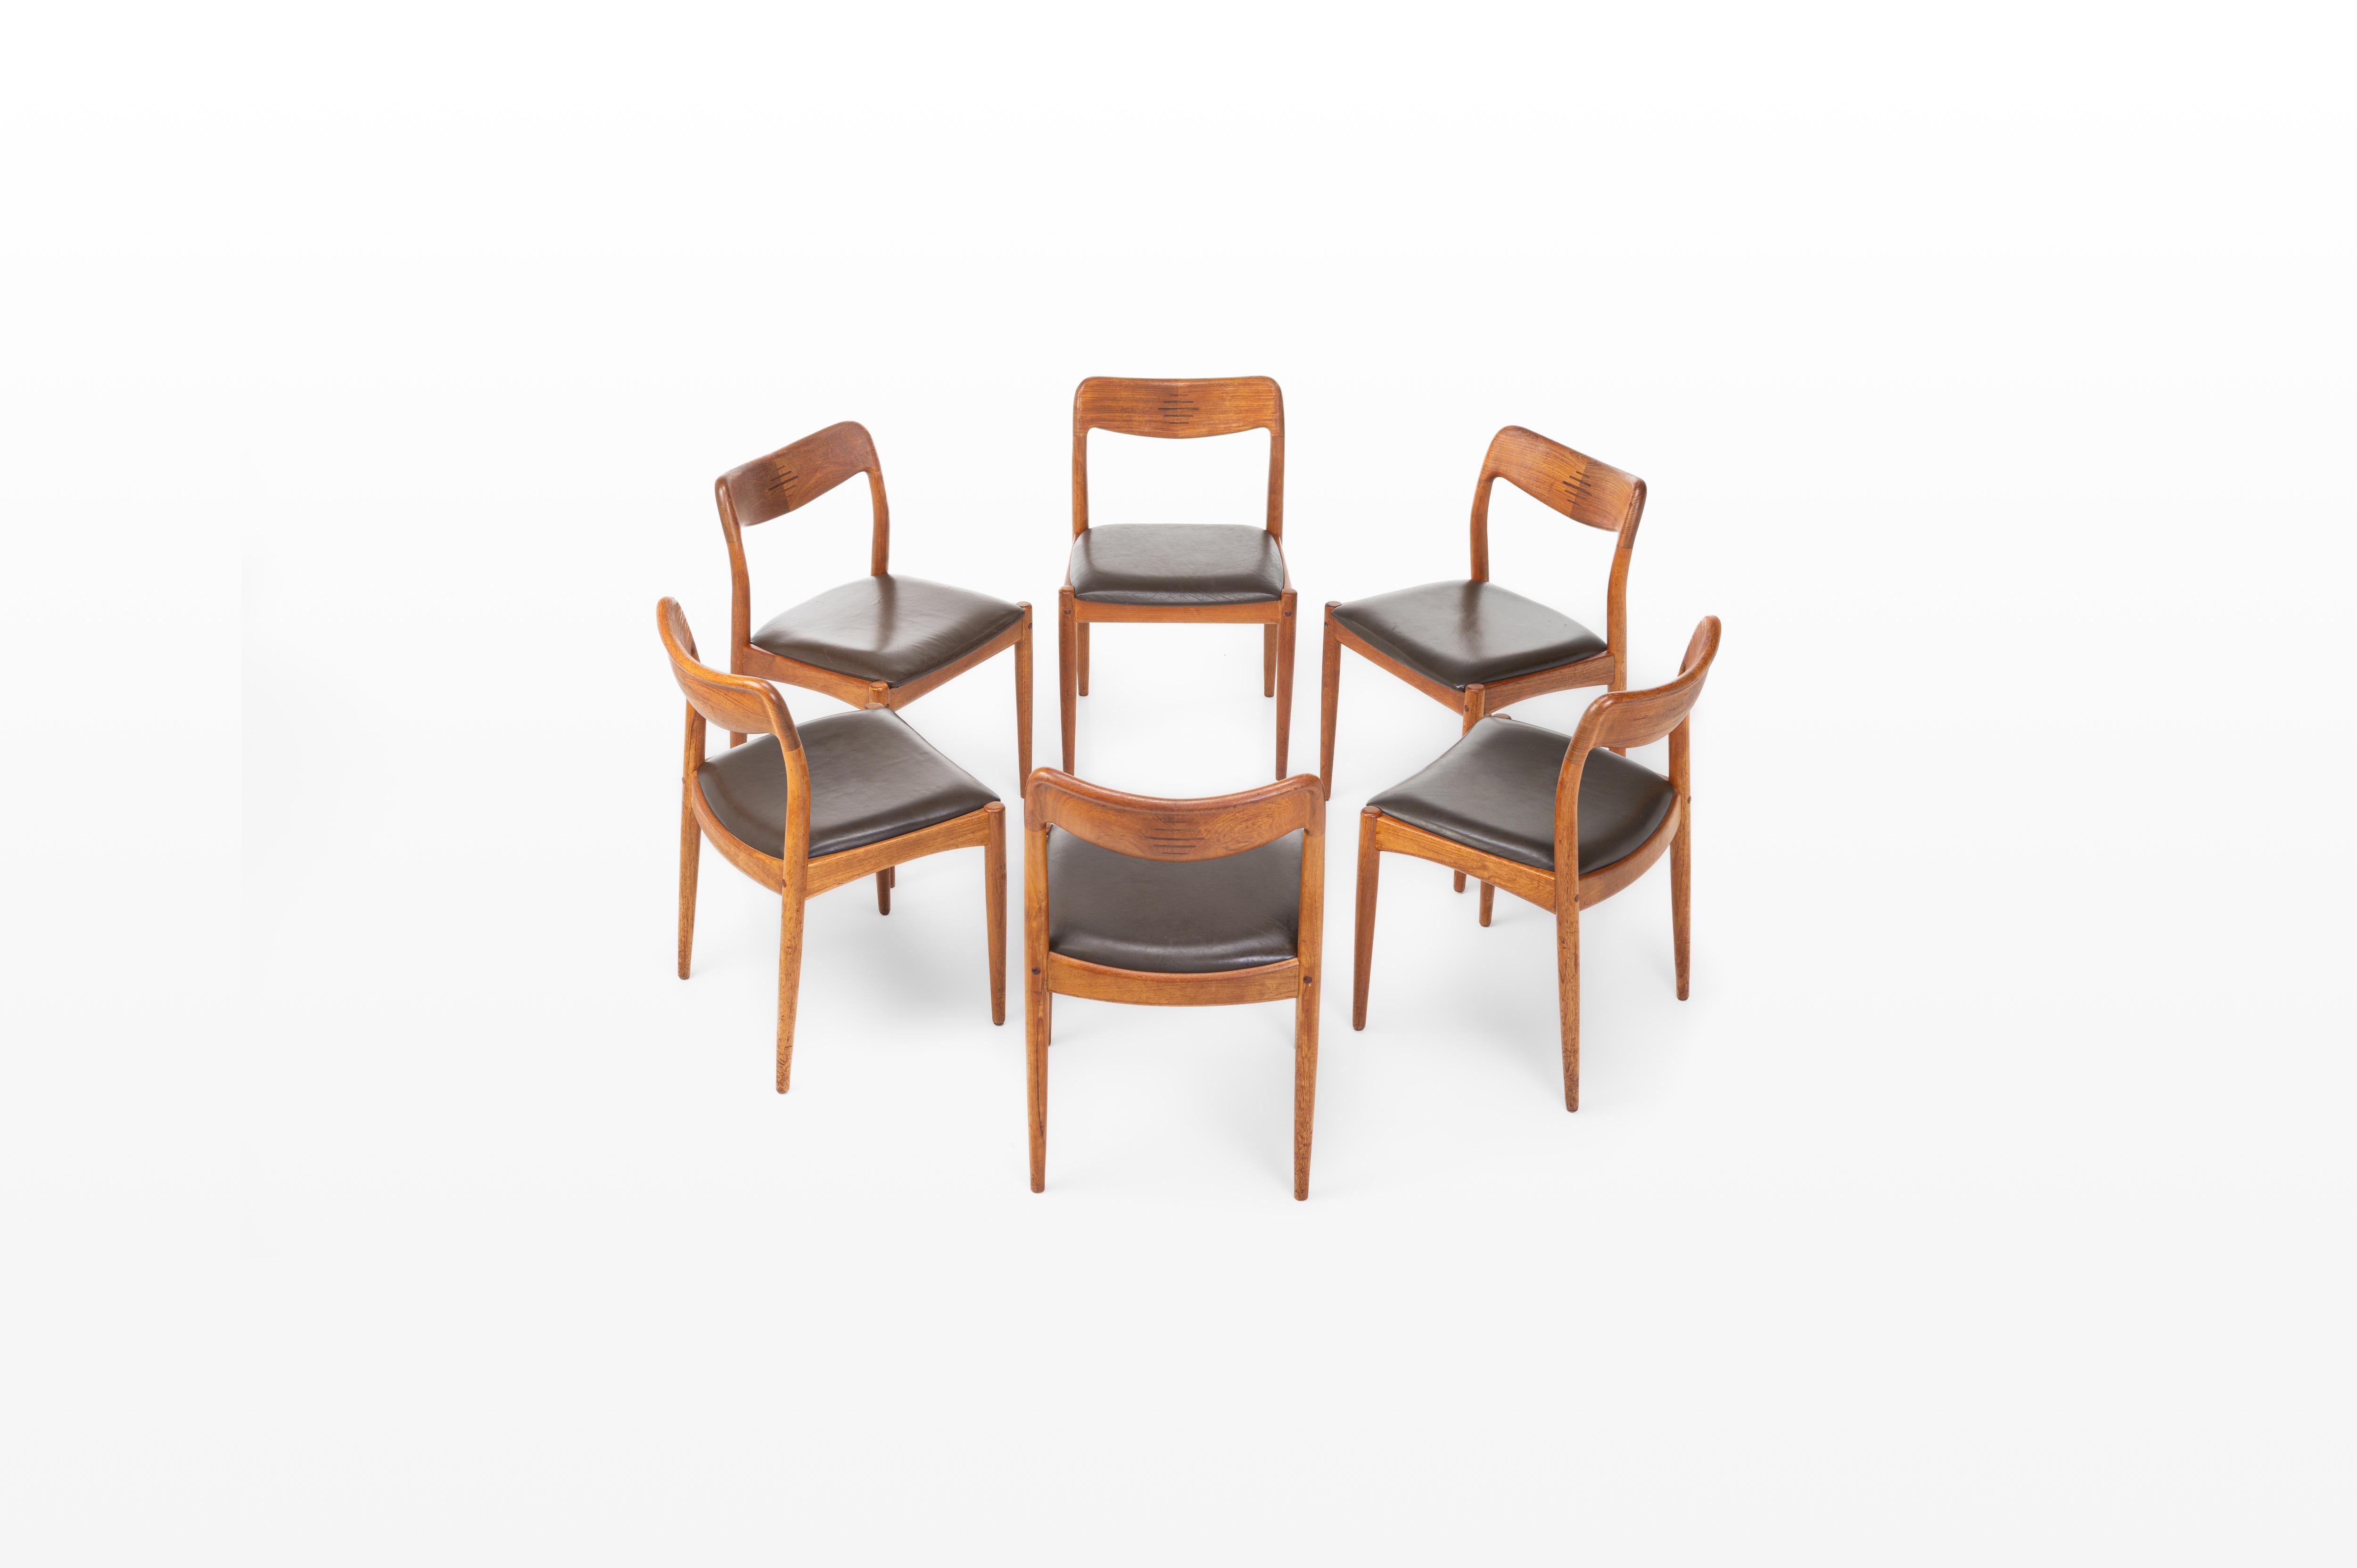 Set of 6 vintage dining chairs designed by Johannes Andersen for Uldum Møbelfabrik in Denmark during the 1960s. Made of teak wood with nice rosewood accents. They have their original brown leather and are in very good condition.